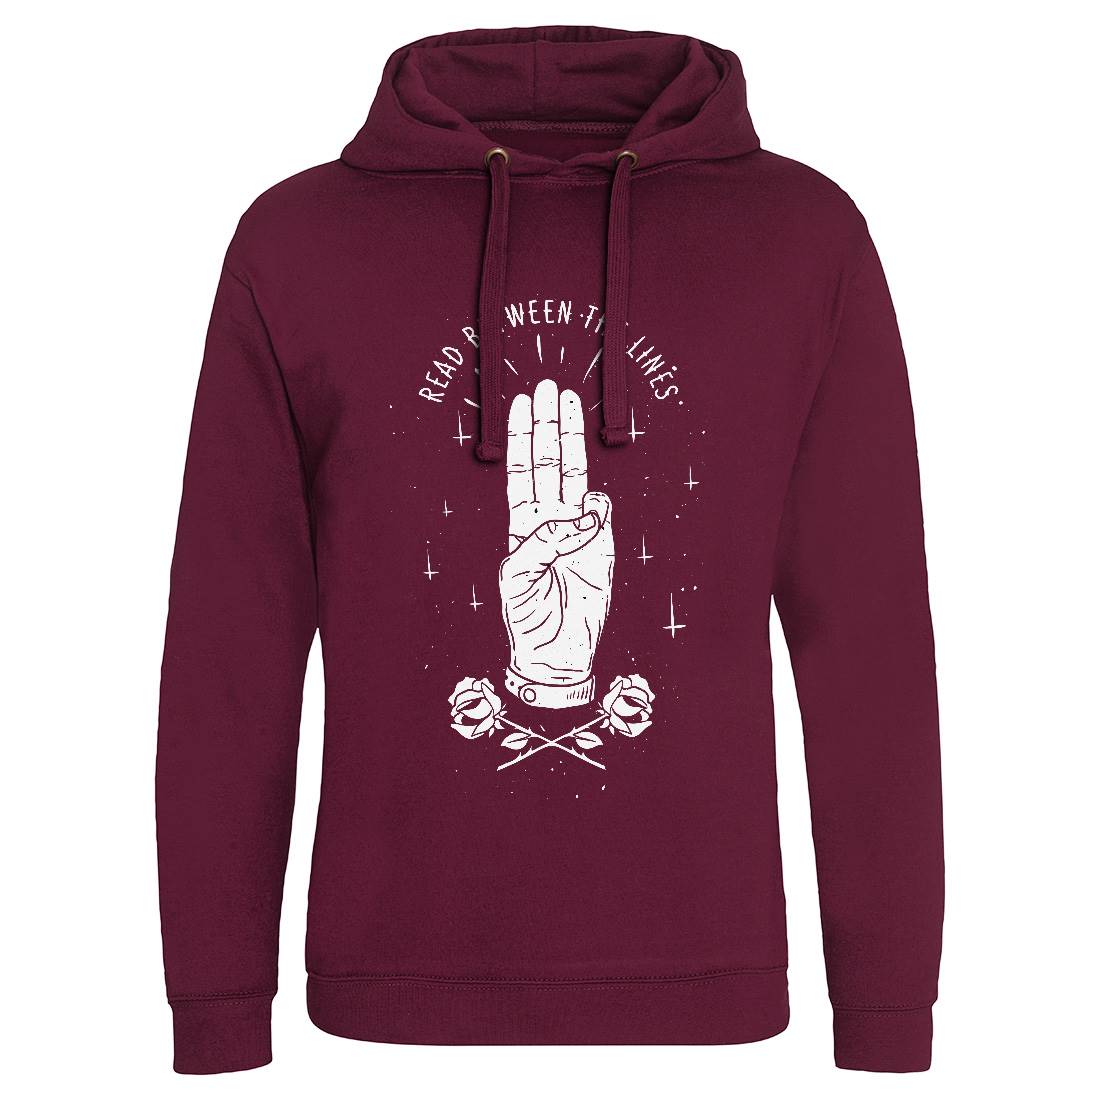 Read Between The Lines Mens Hoodie Without Pocket Tattoo D483